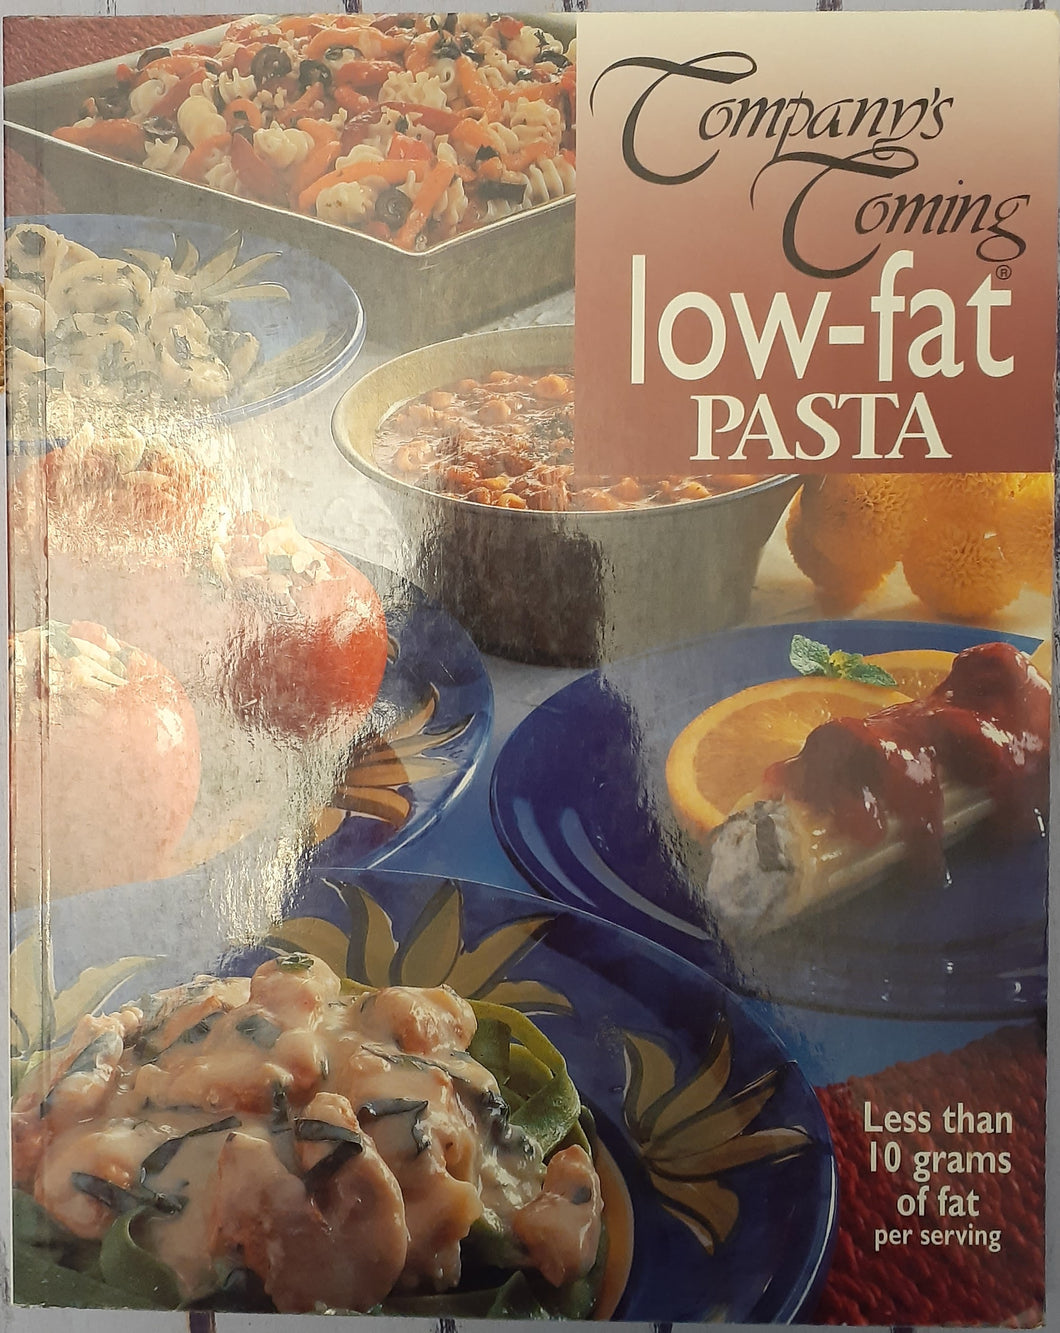 Company's Coming - Low-Fat Pasta